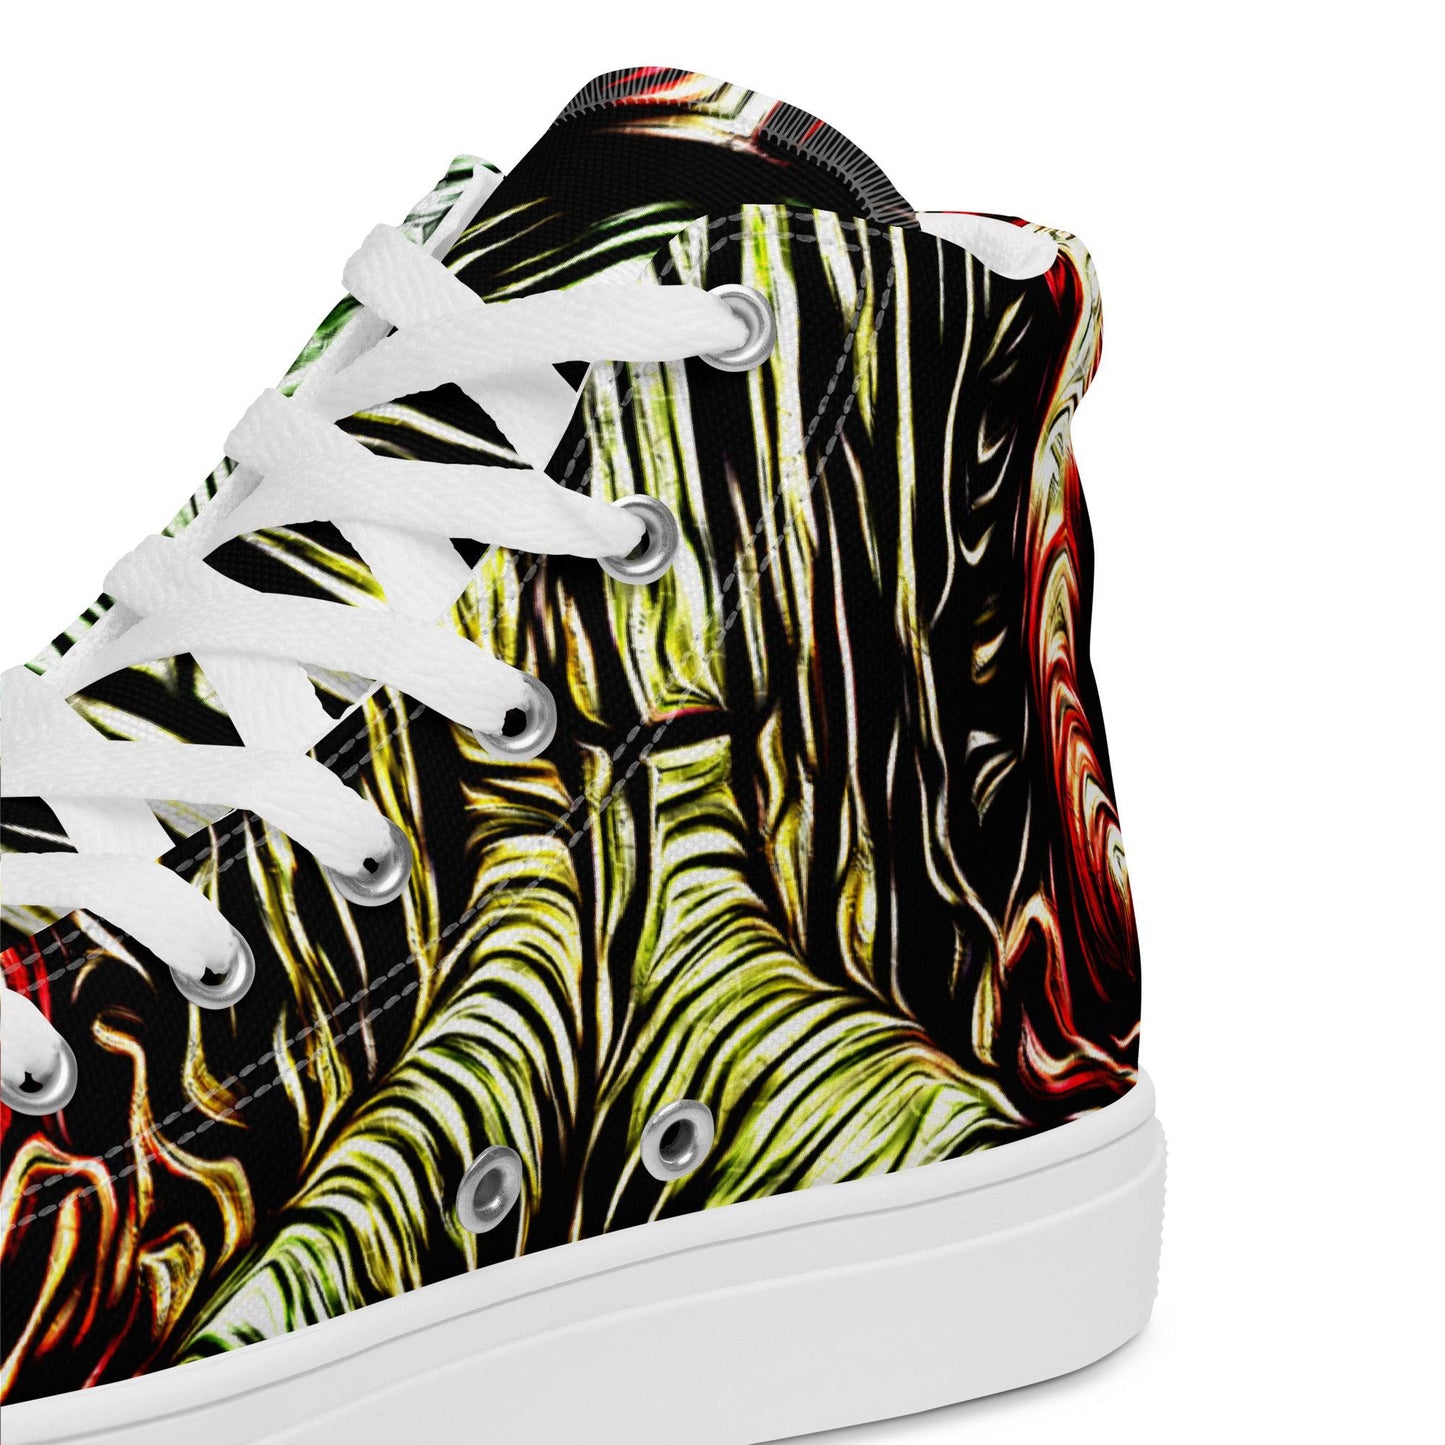 Cthulhu Vision High Top Canvas Shoes (Men’s)